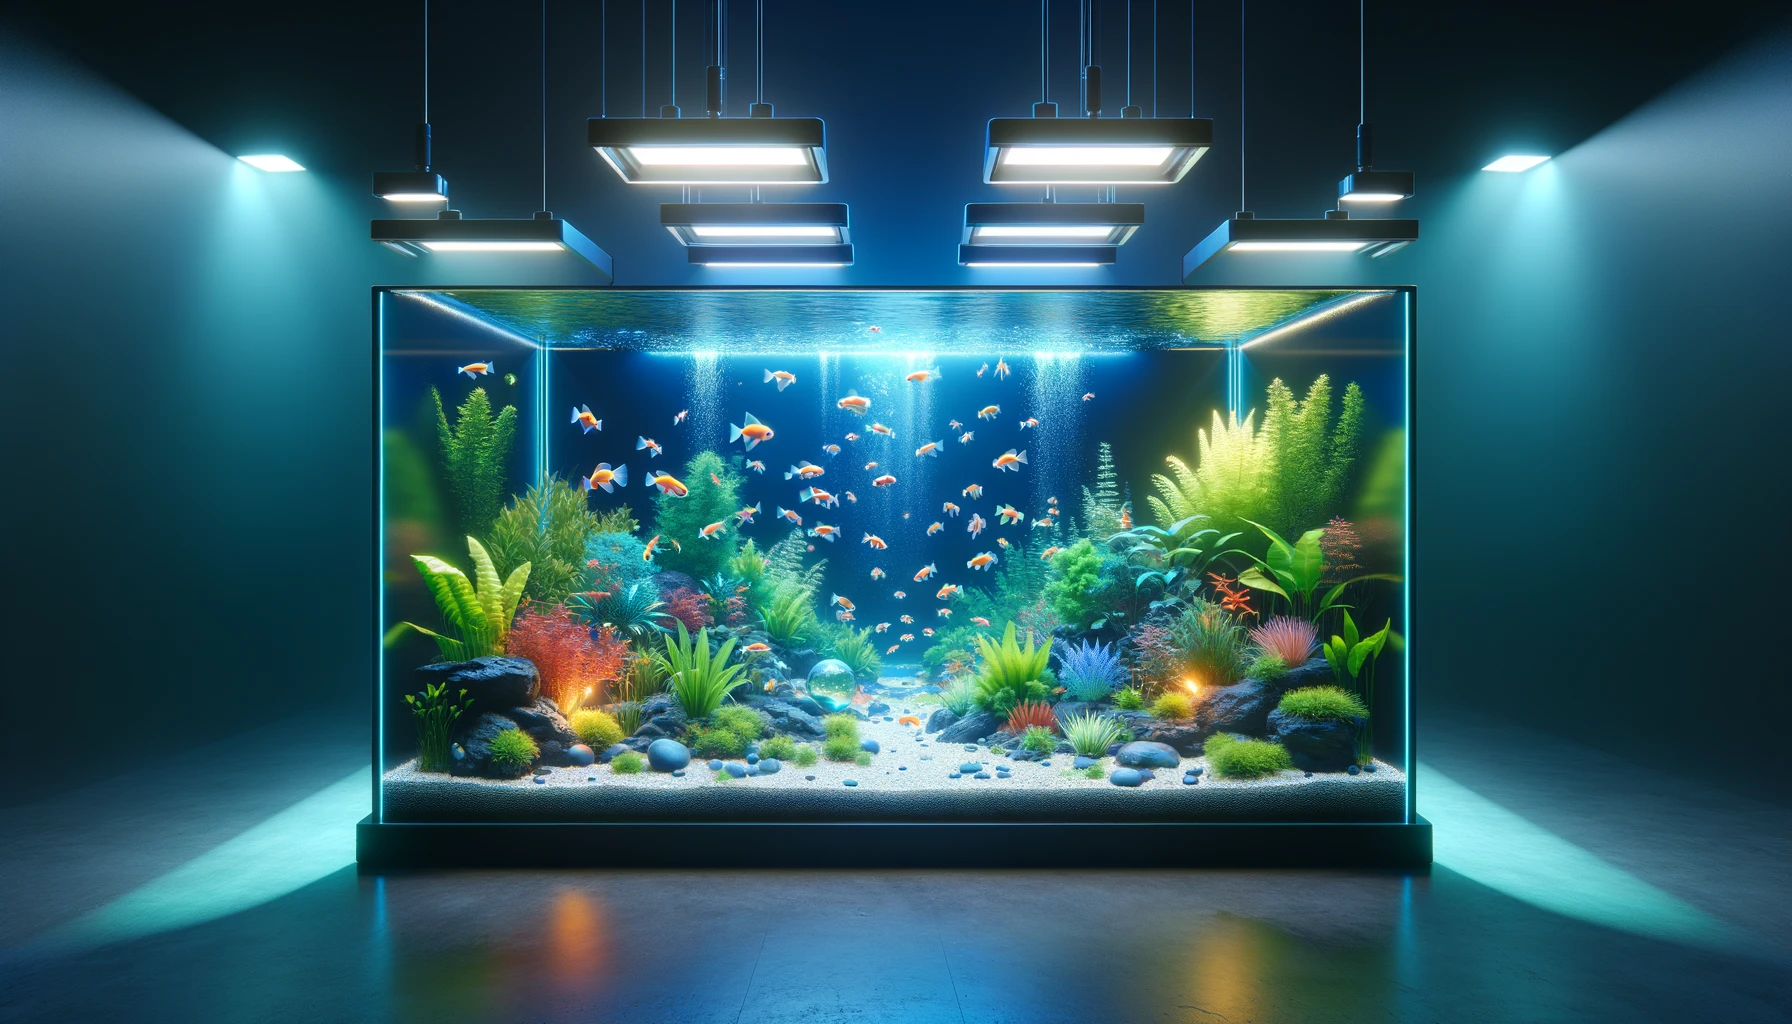 depicting the essential conditions needed for successful GloFish breeding. This image should illustrate an aquari